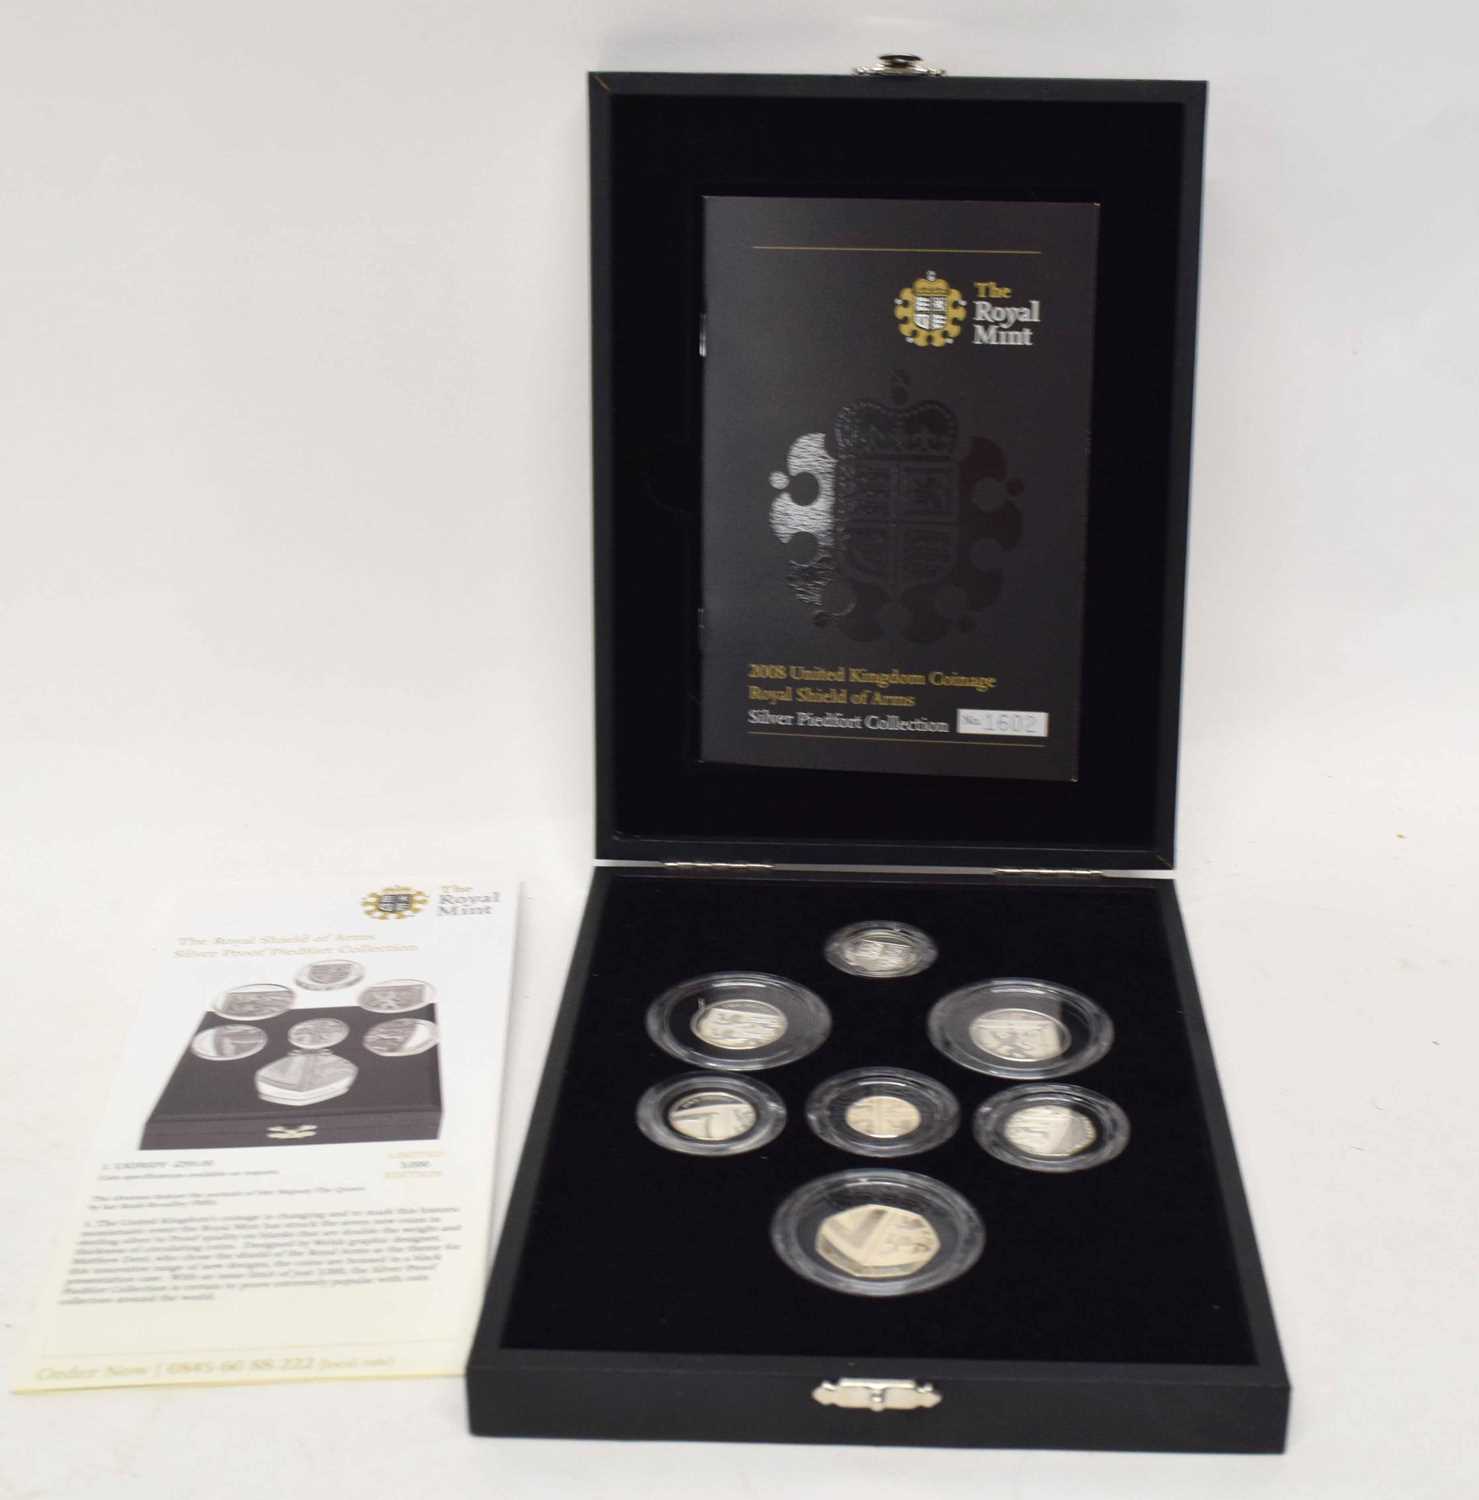 Lot 125 - Cased 2008 silver seven coin proof set